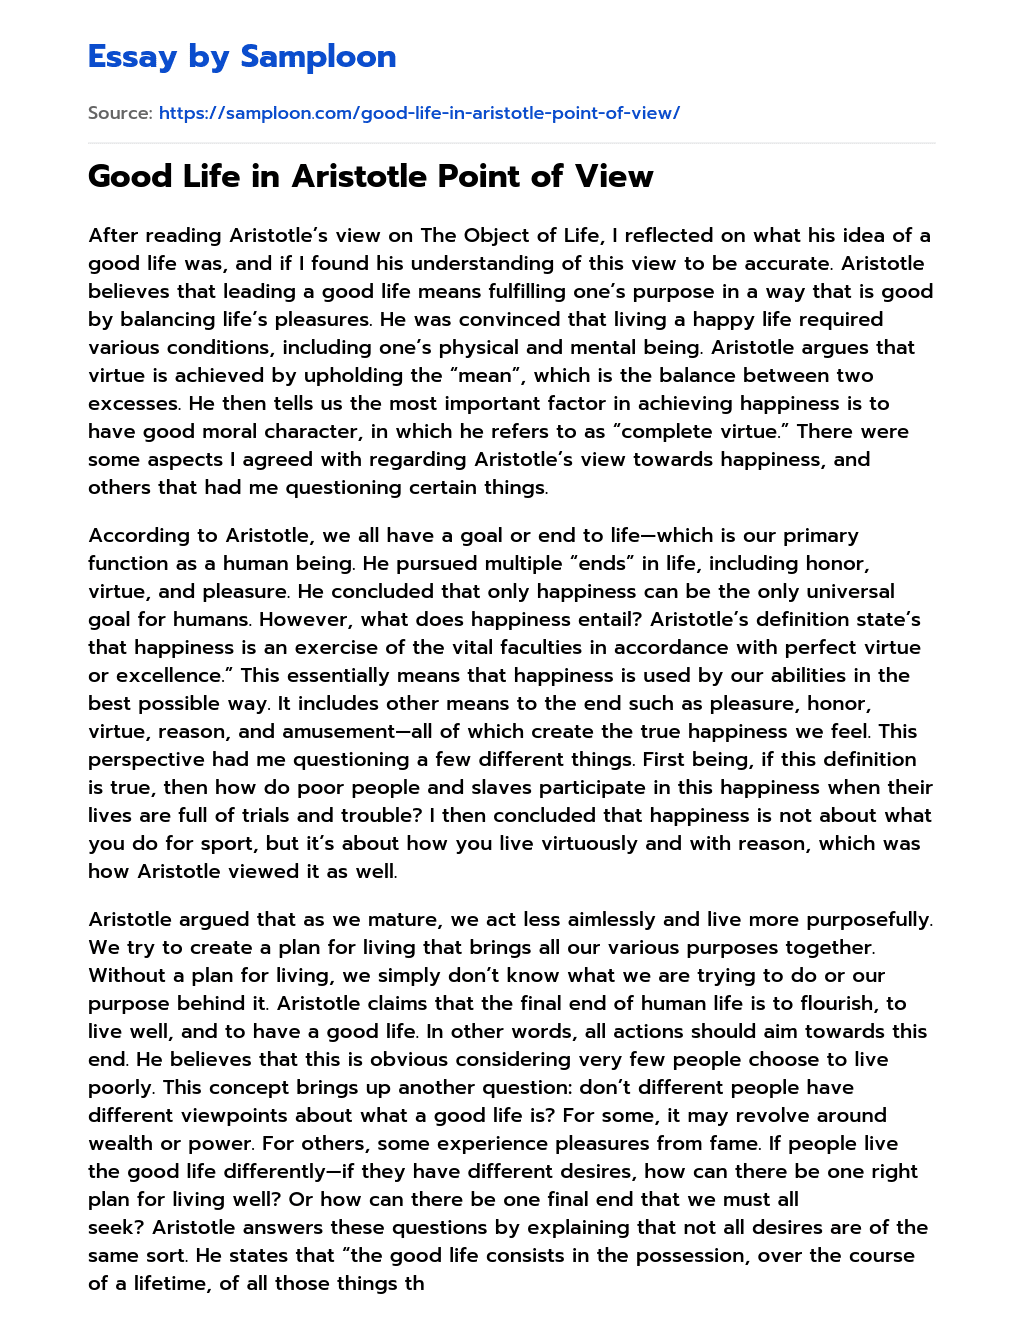 Good Life in Aristotle Point of View essay